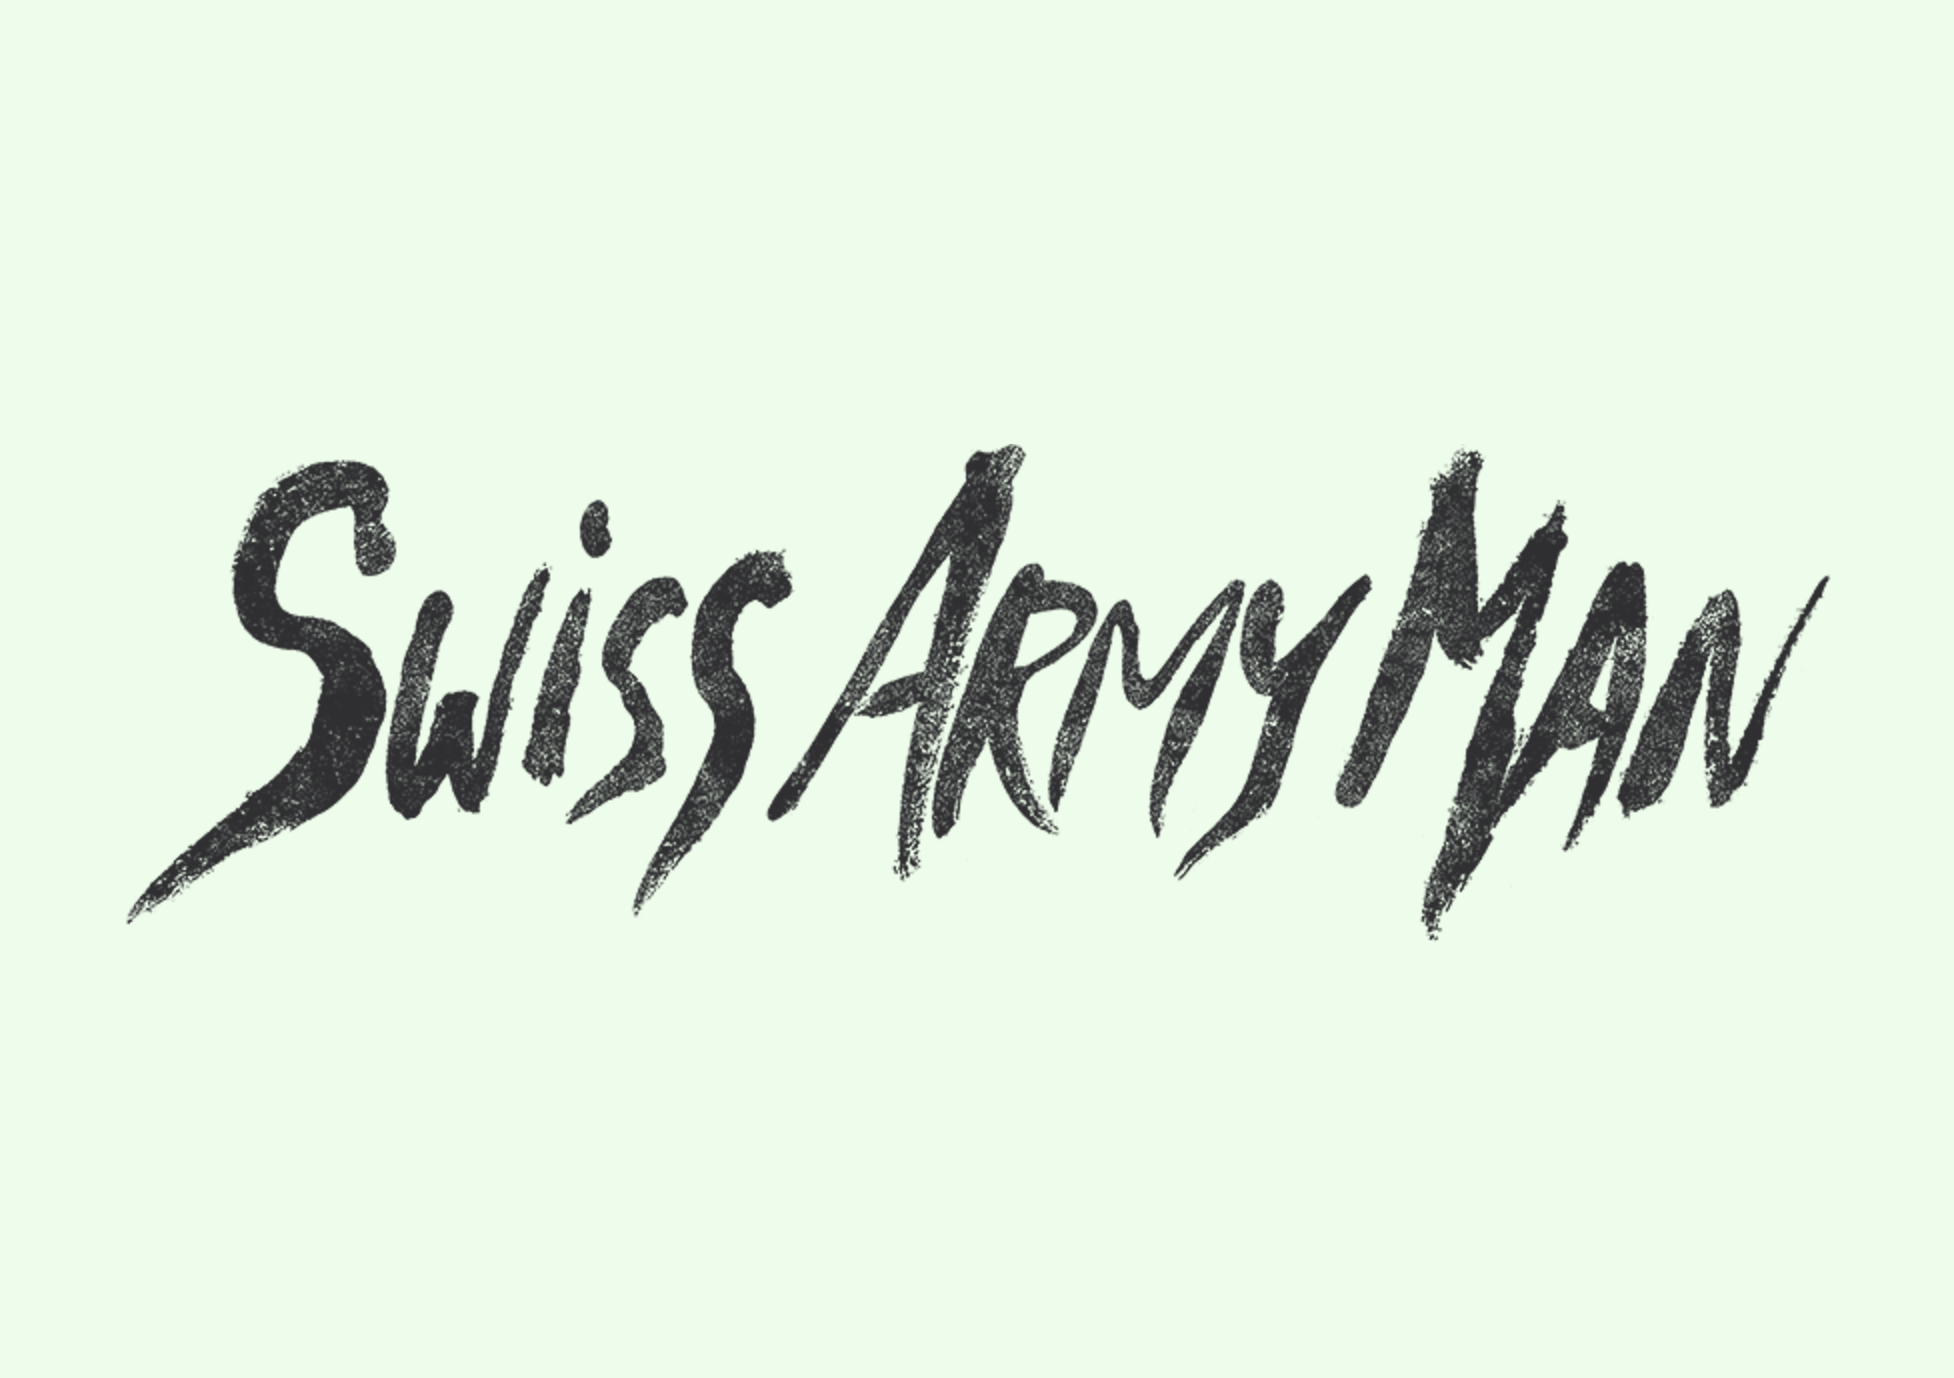 Swiss Army Man Wallpaper Image Photos Pictures Background